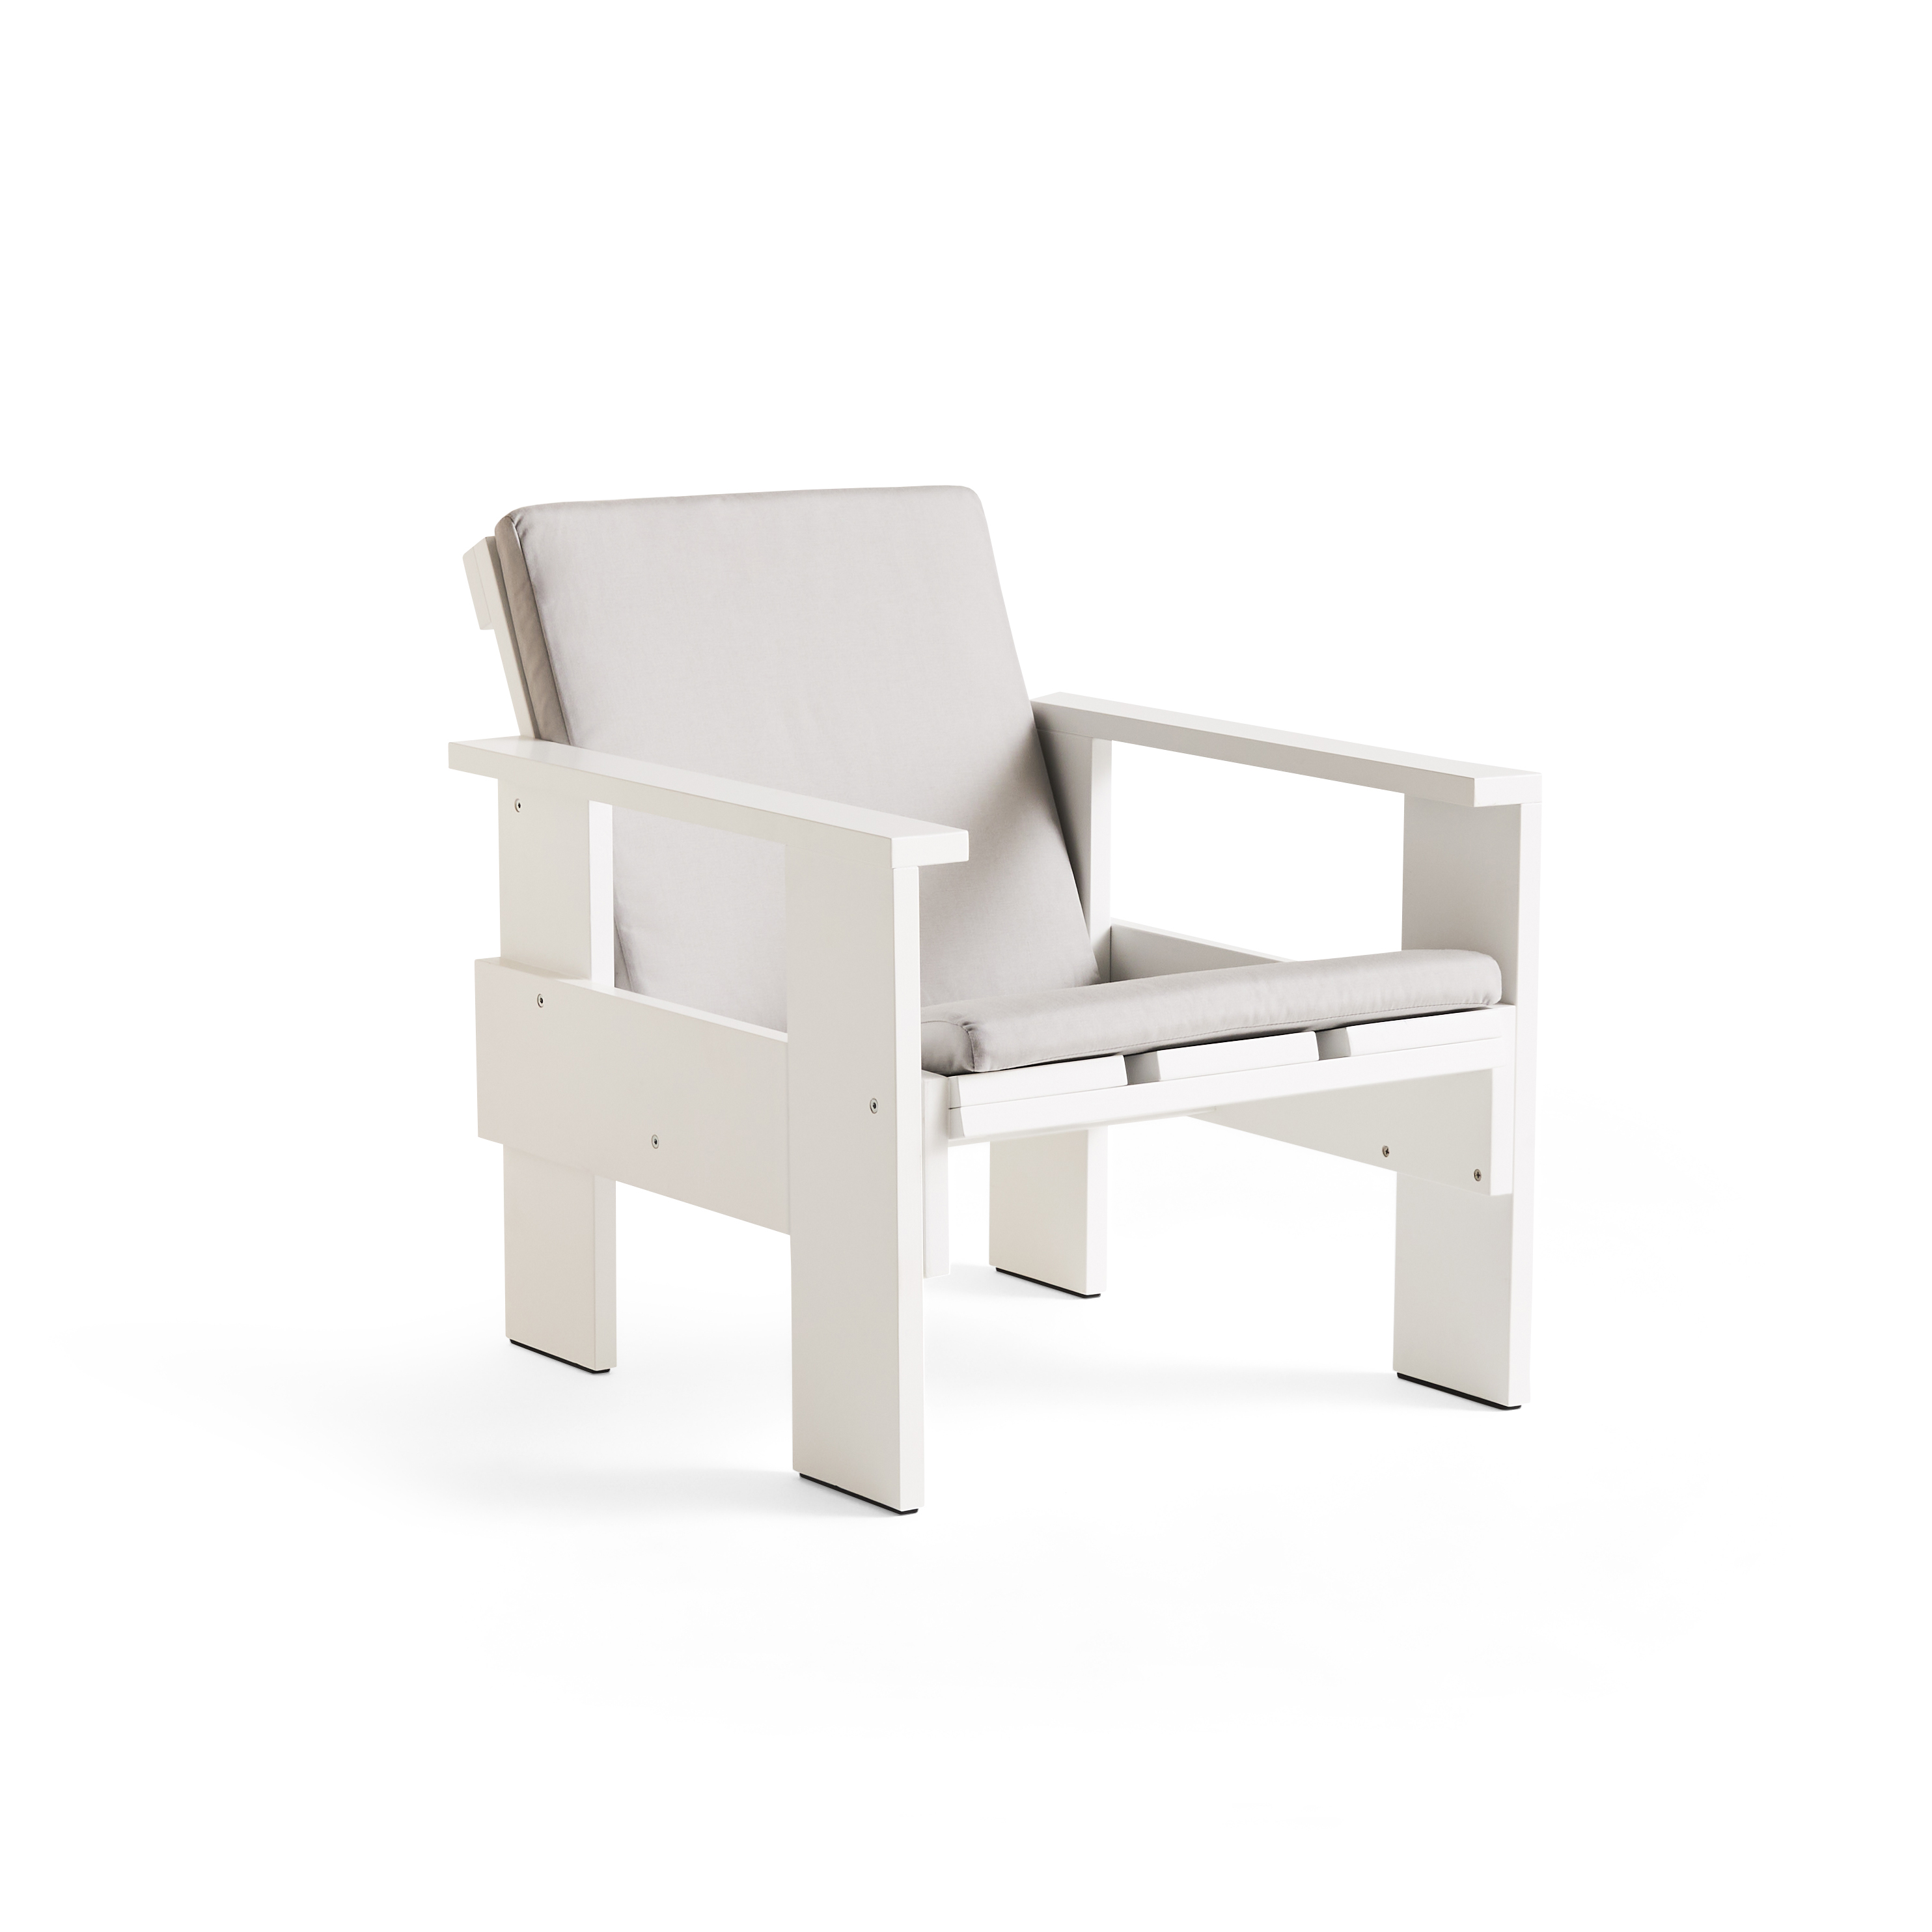 Crate lounge chair - White waterbased lacq pinewood